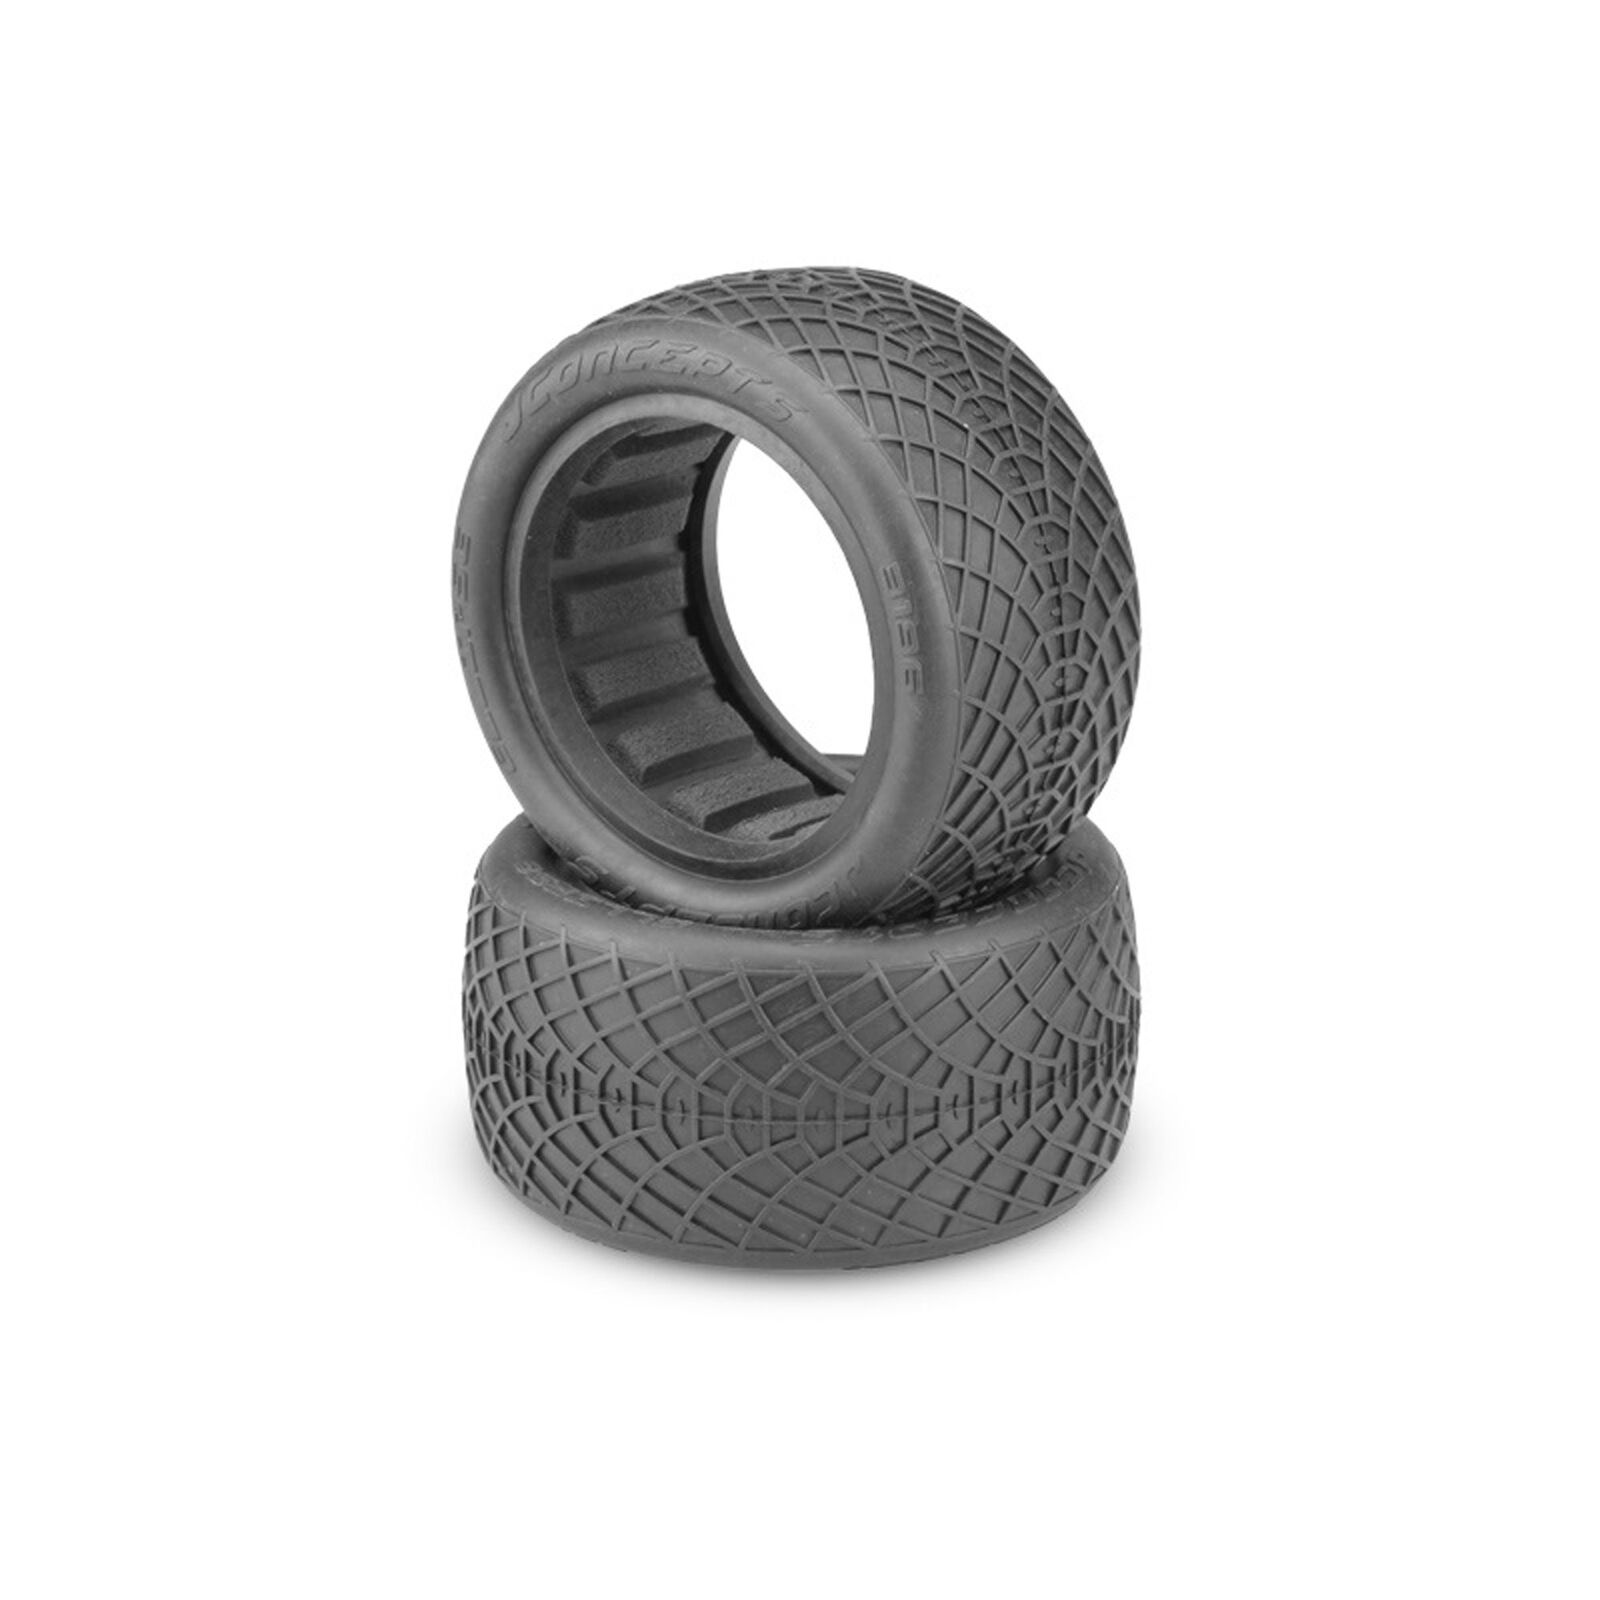 1/10 Ellipse 2.2” Rear Buggy Tires and Inserts, Aqua Compound (2)